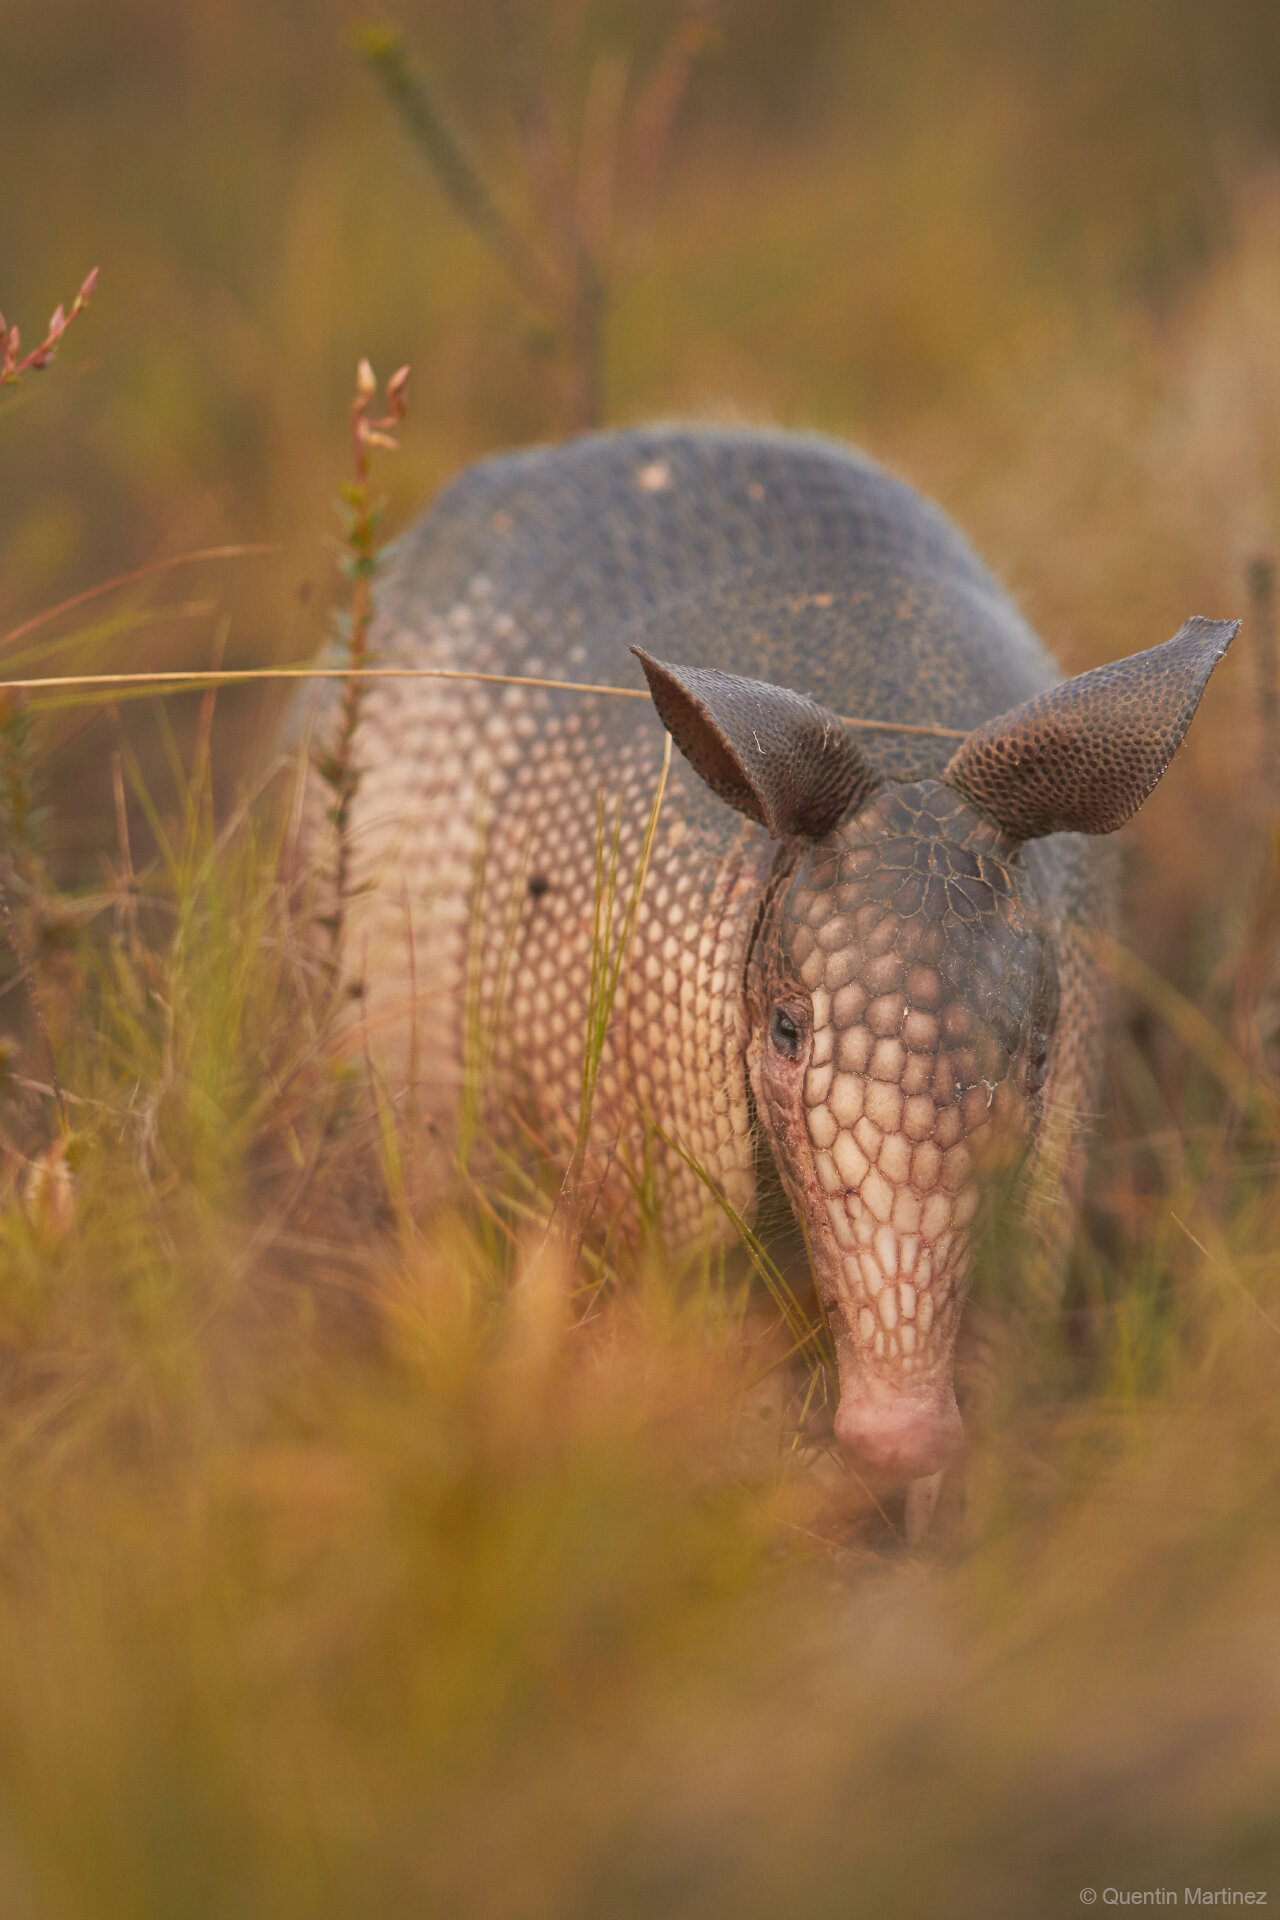 Rewriting the armadillo family tree: A new species, plus a name change for the state mammal of Texas